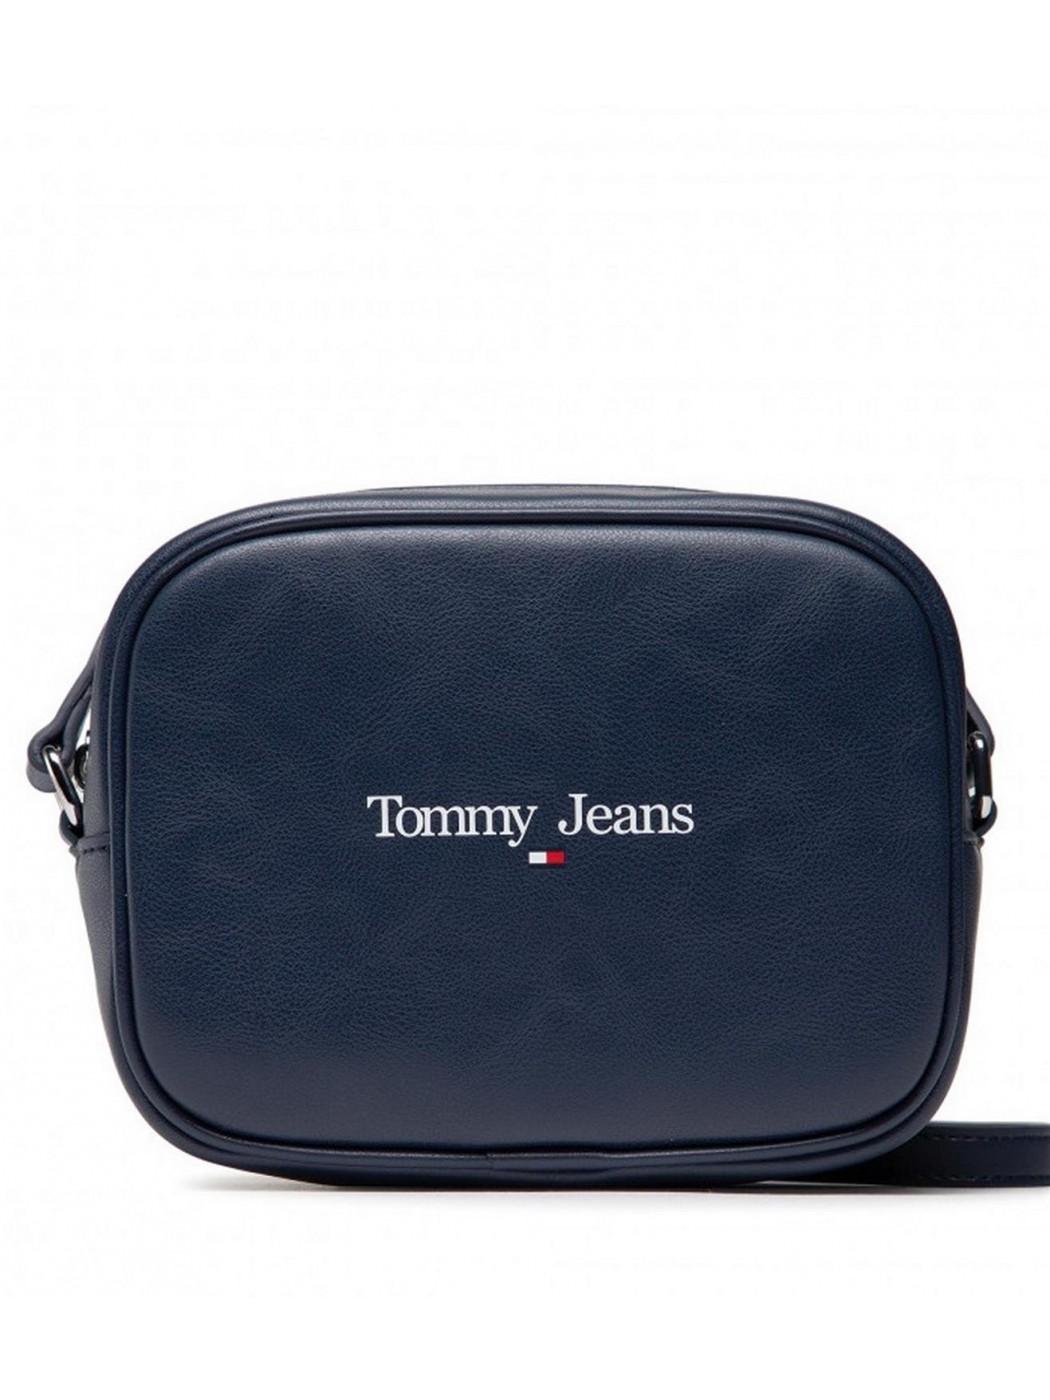 BOLSO TOMMY JEANS MUJER TJW...